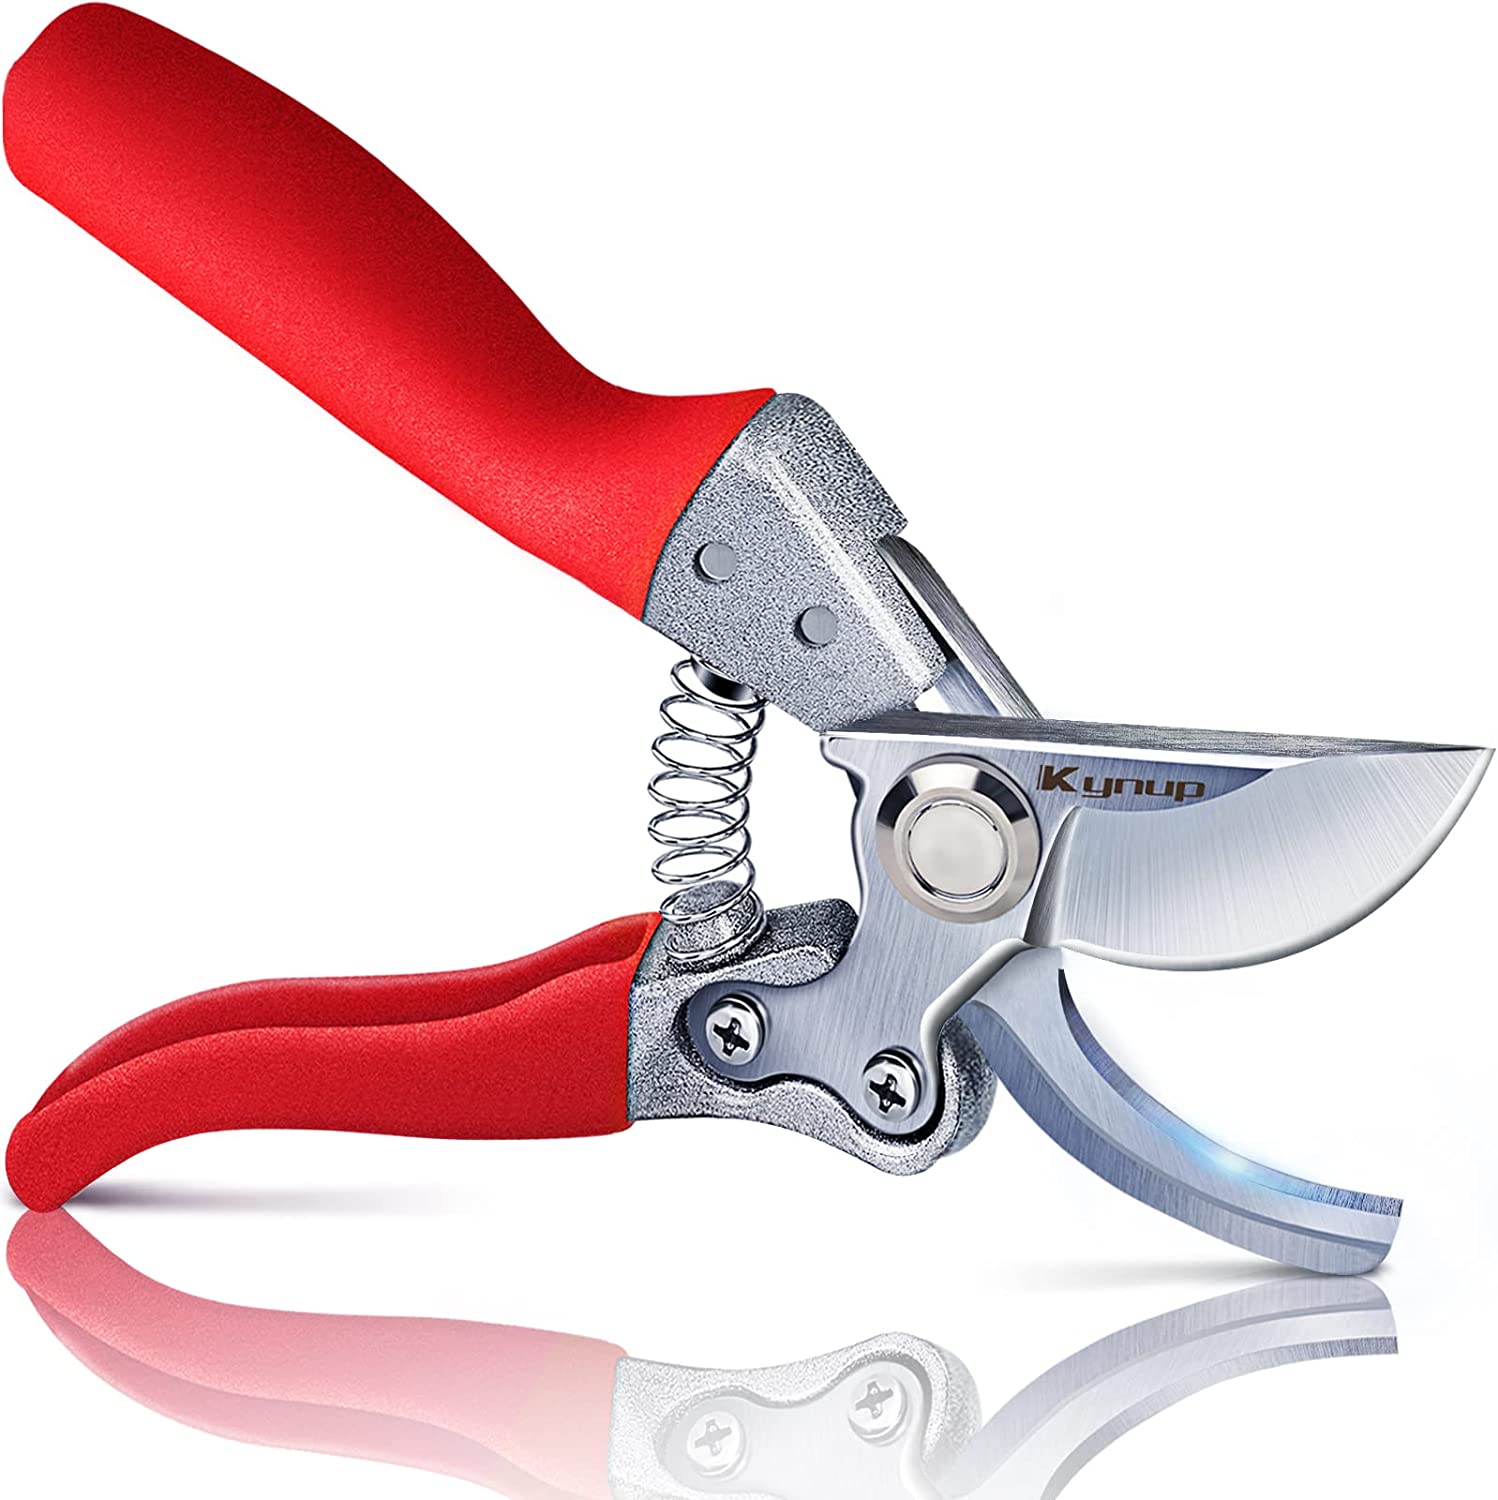 red Kynup pruning shears